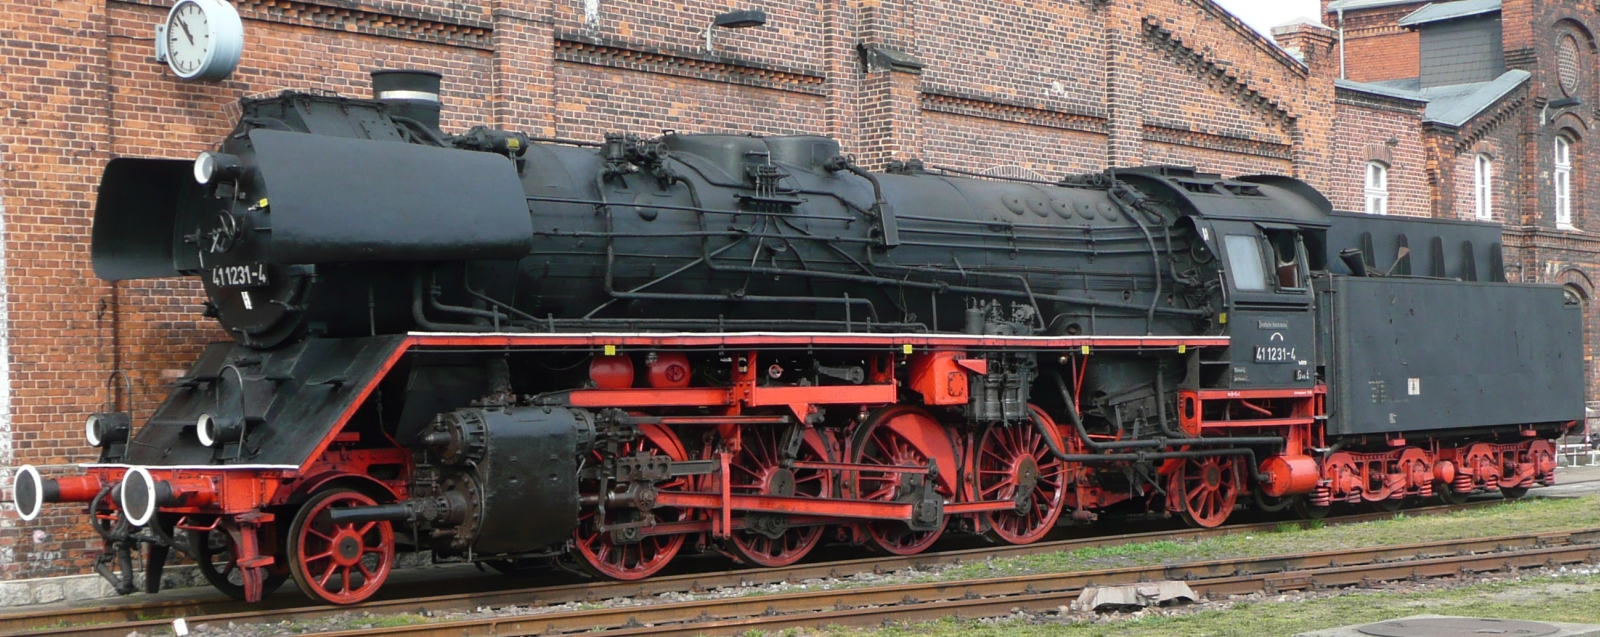 41 1231 in April 2016 in the traditional depot in Stassfurt